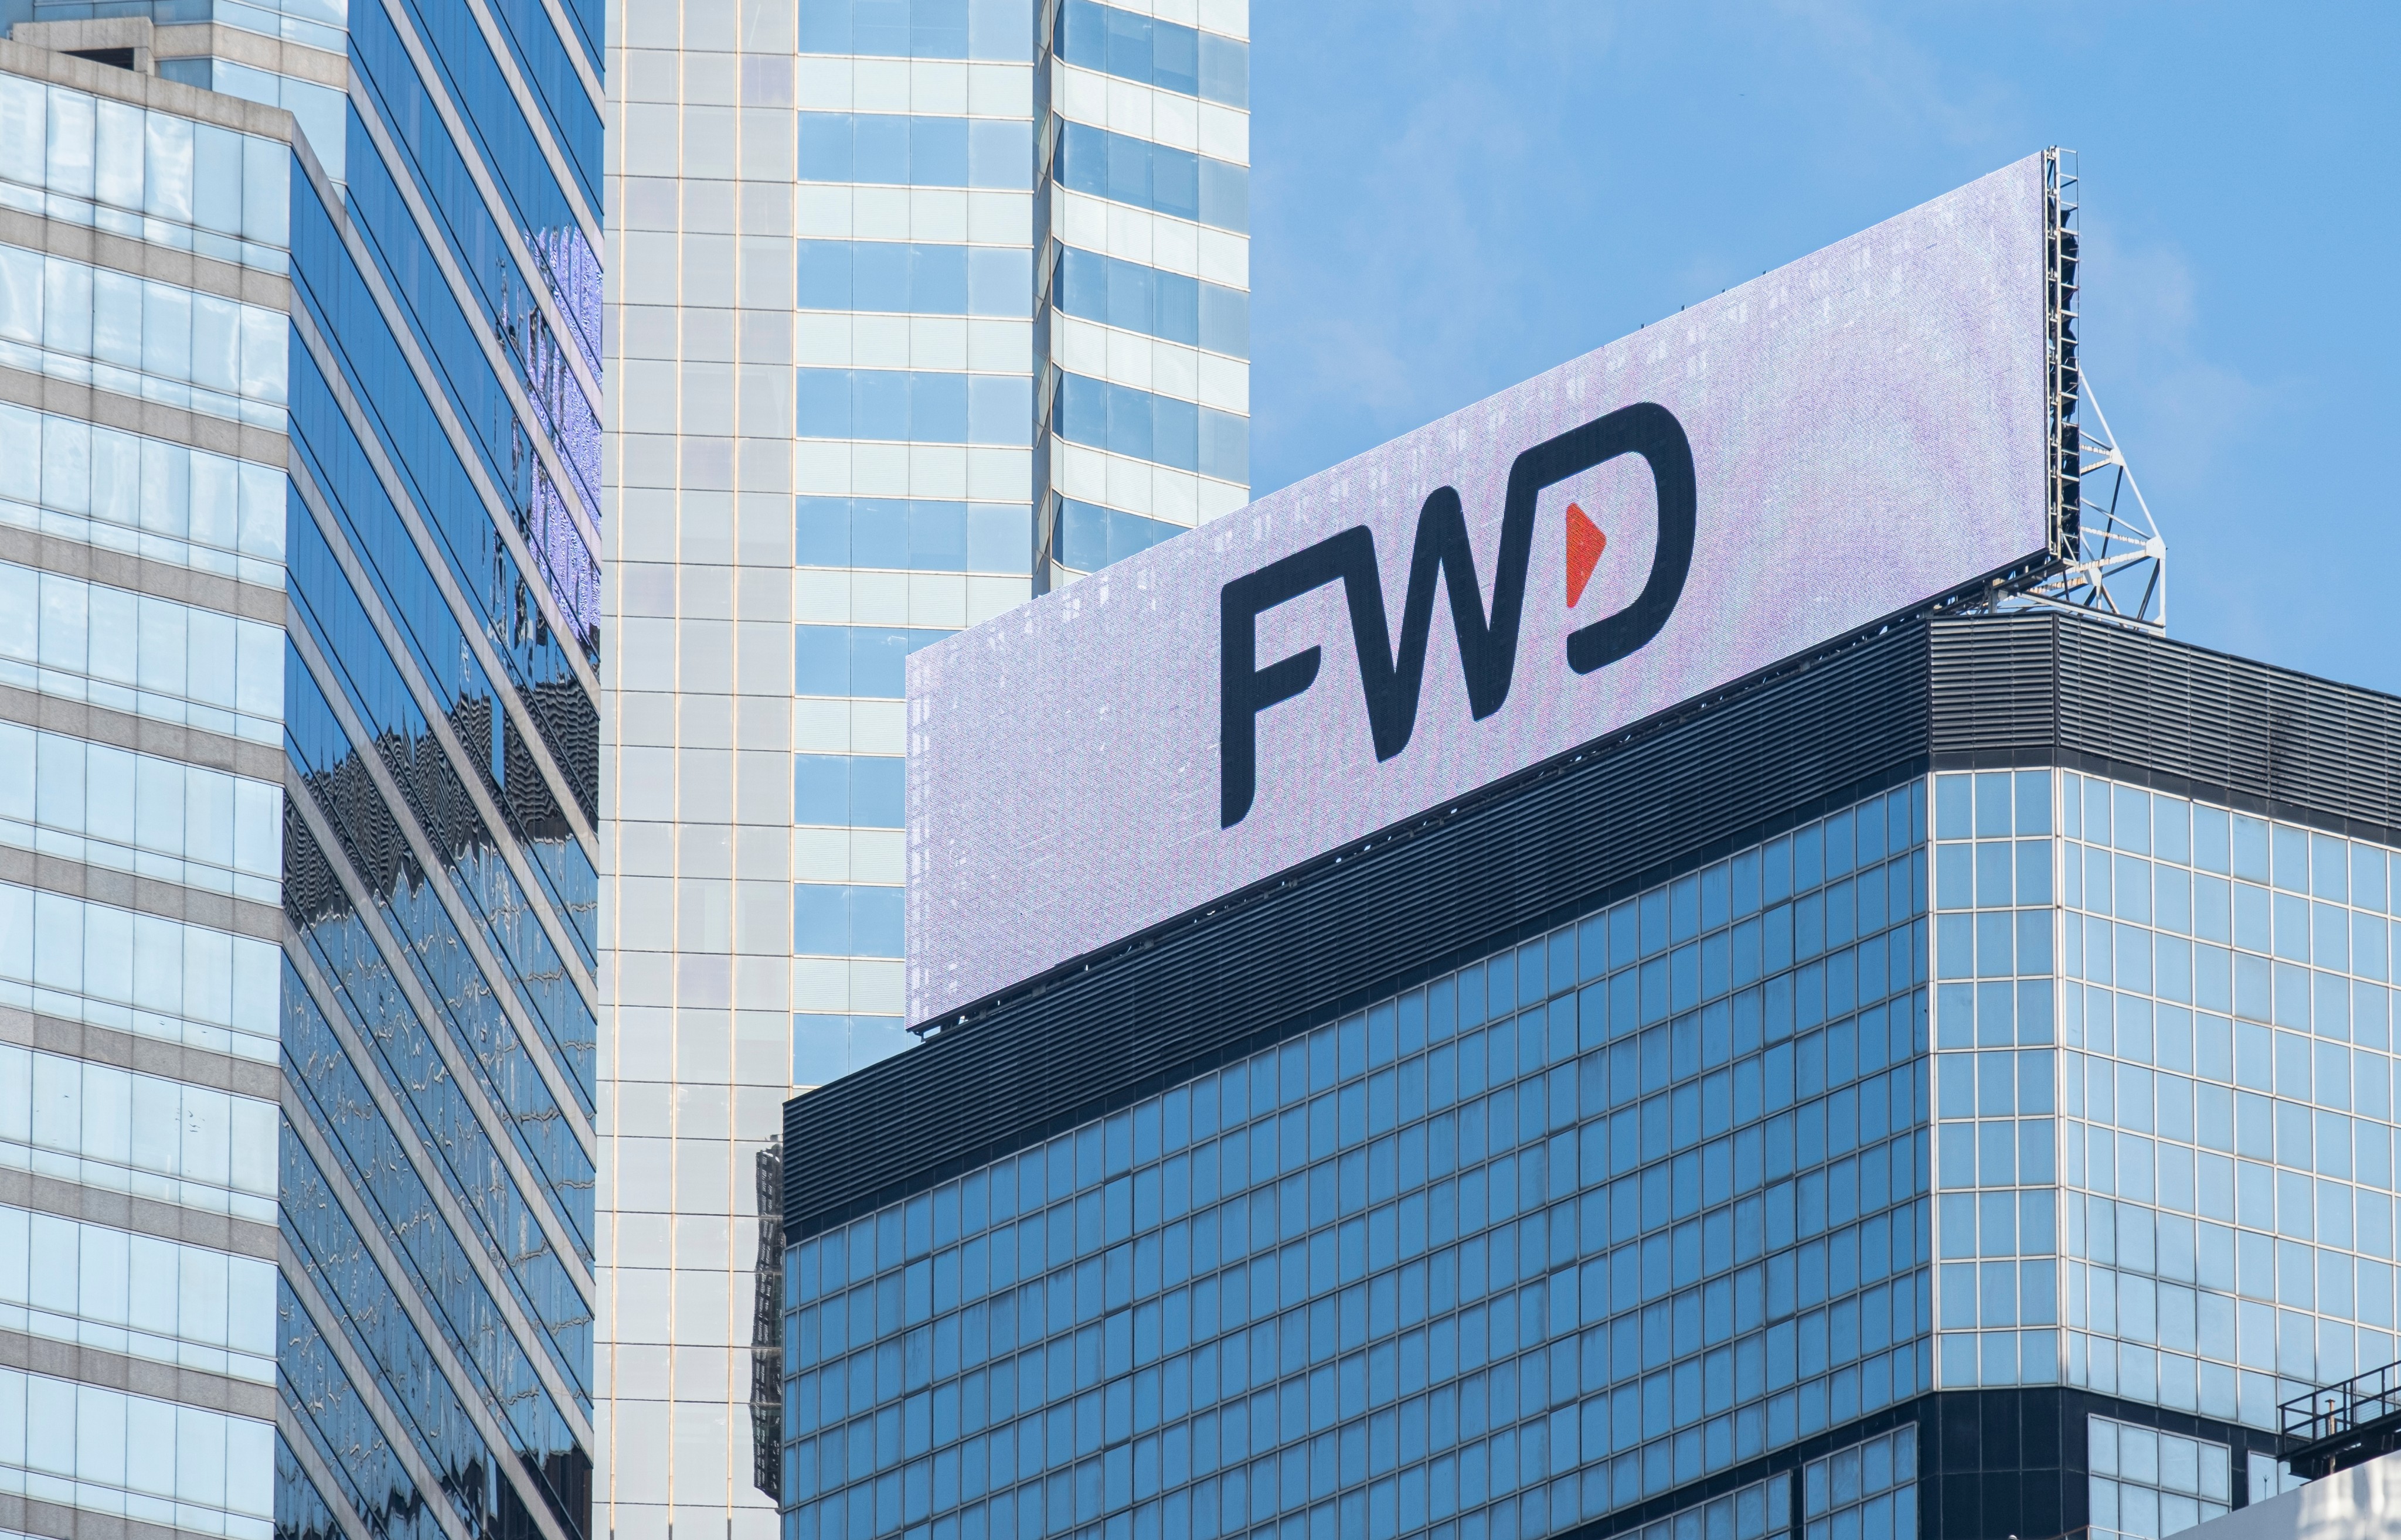 The logo of FWD is seen in Hong Kong on September 25, 2021. Photo: Shutterstock